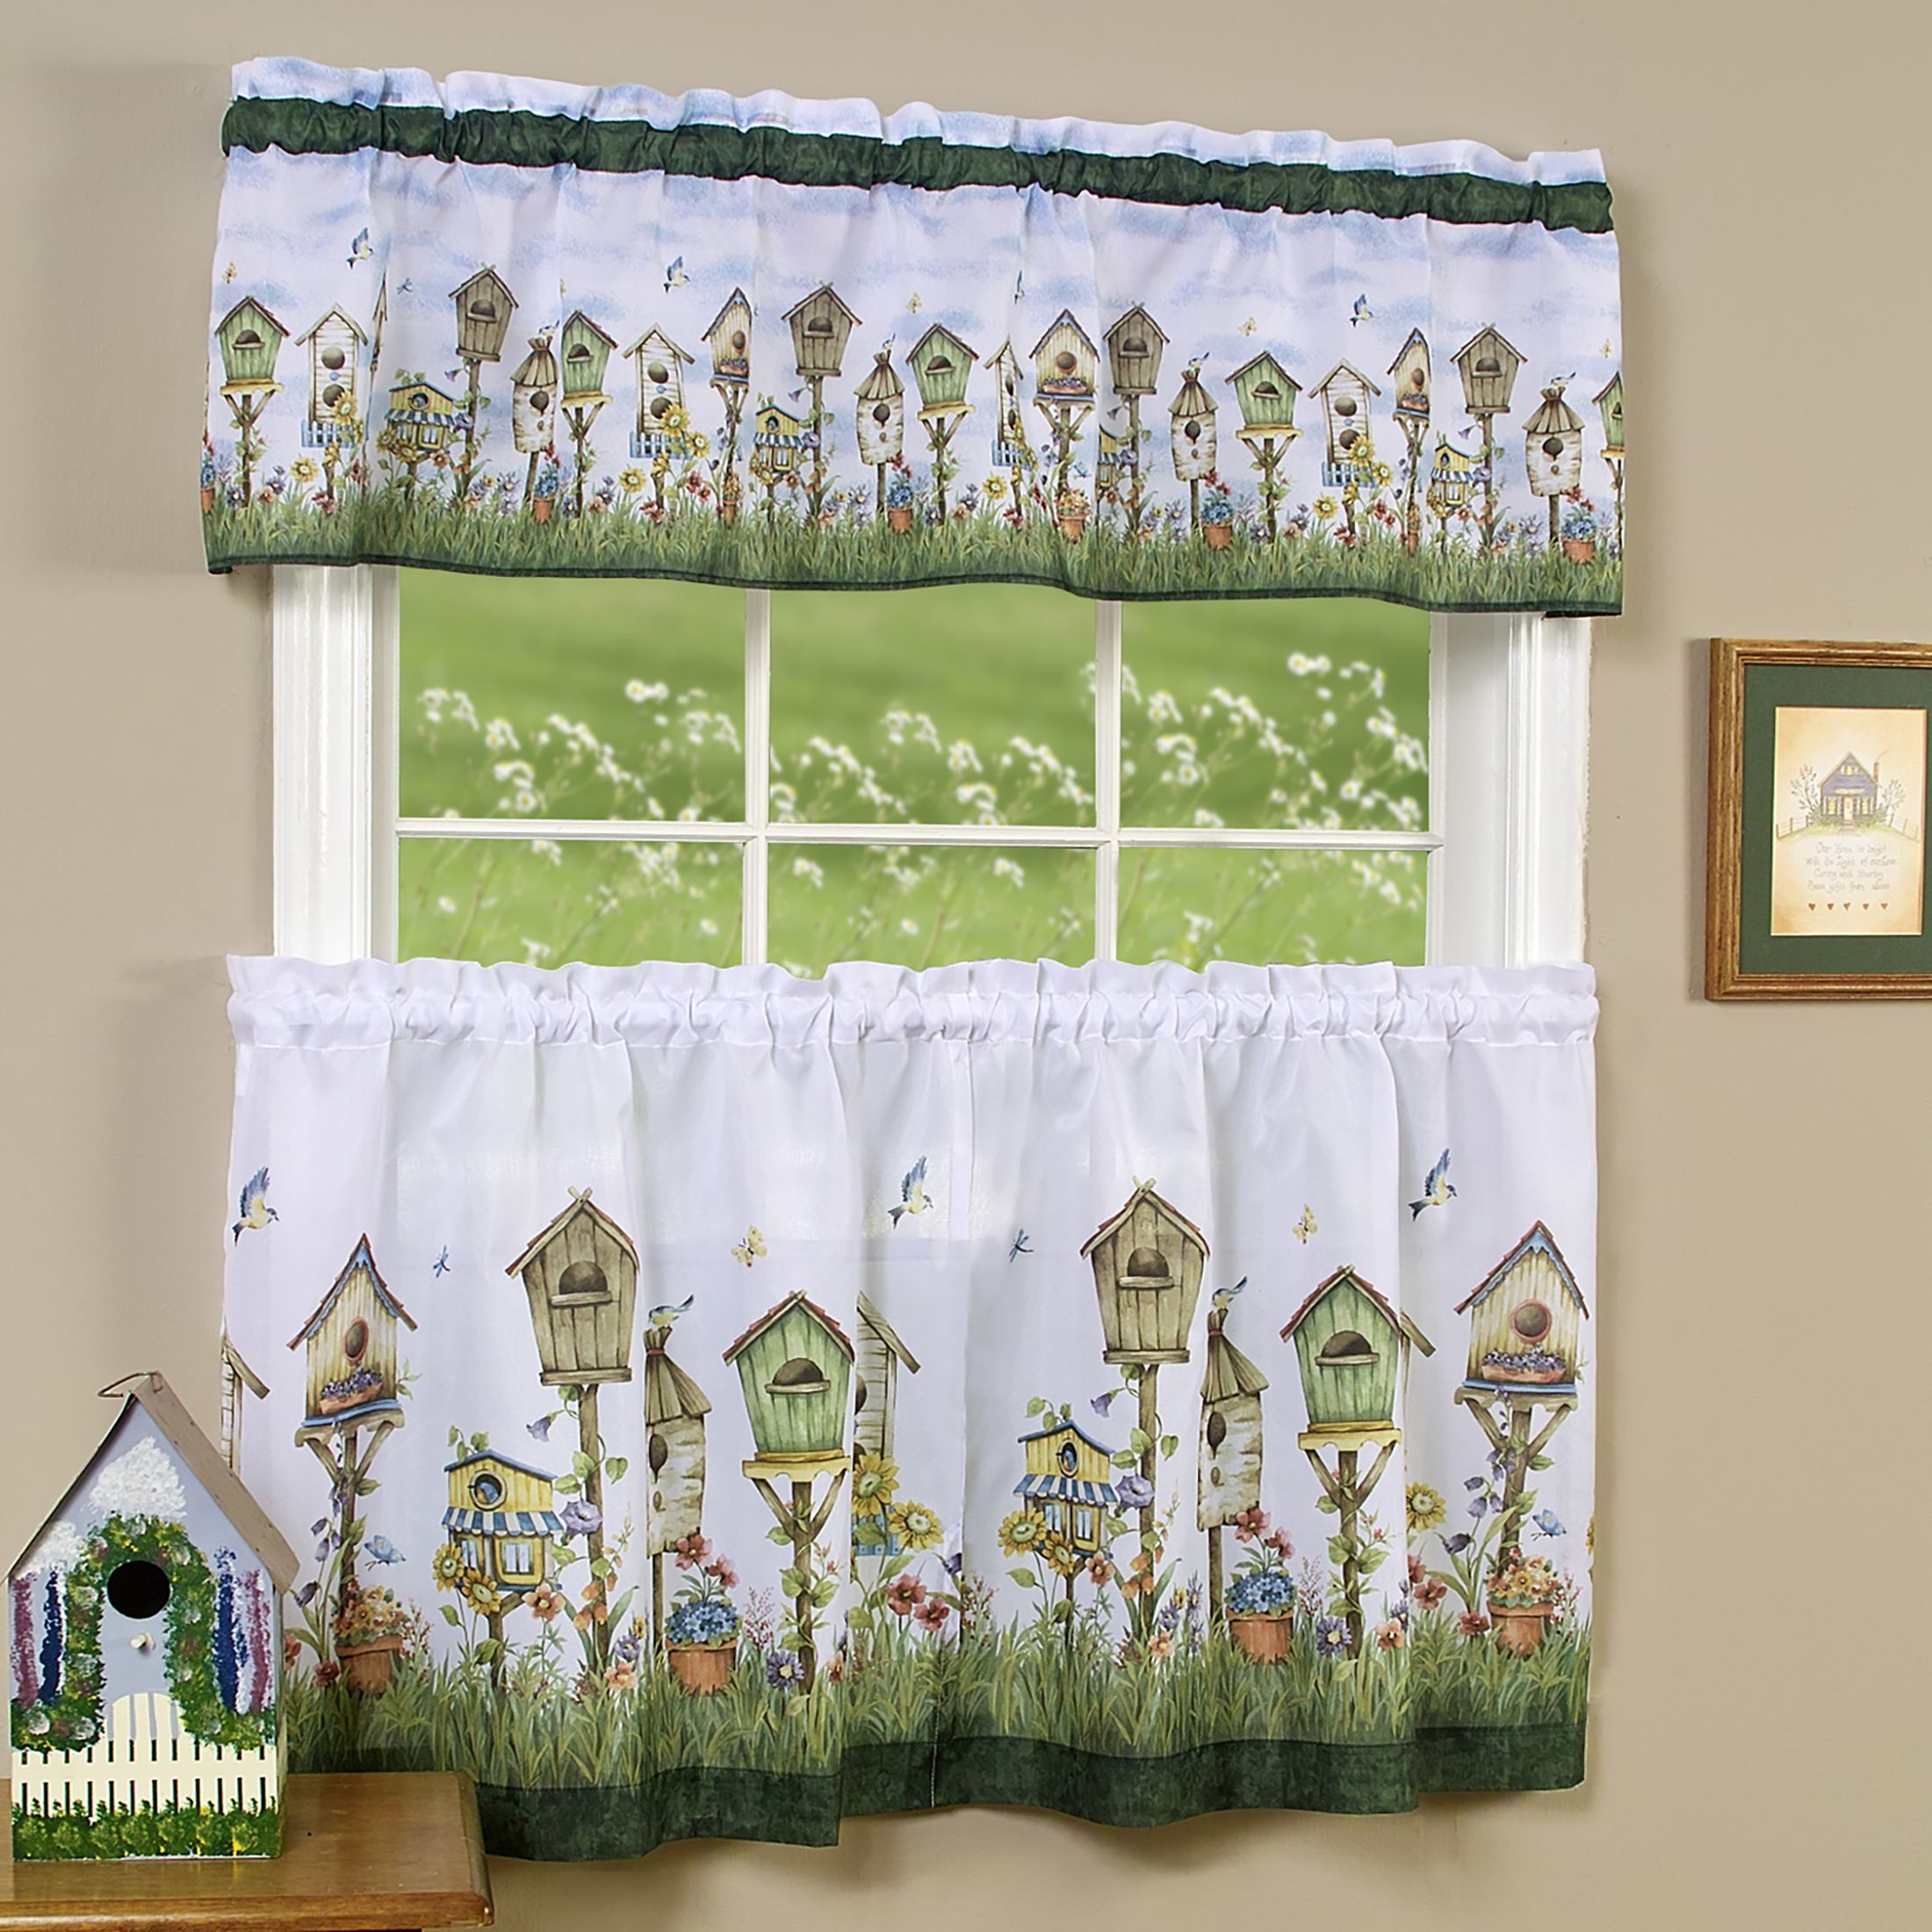 Details About 3pc Floral Window Kitchen Curtain Set Love Birds Birdhouse  Tier Panel & Valance With Kitchen Window Tier Sets (View 9 of 20)